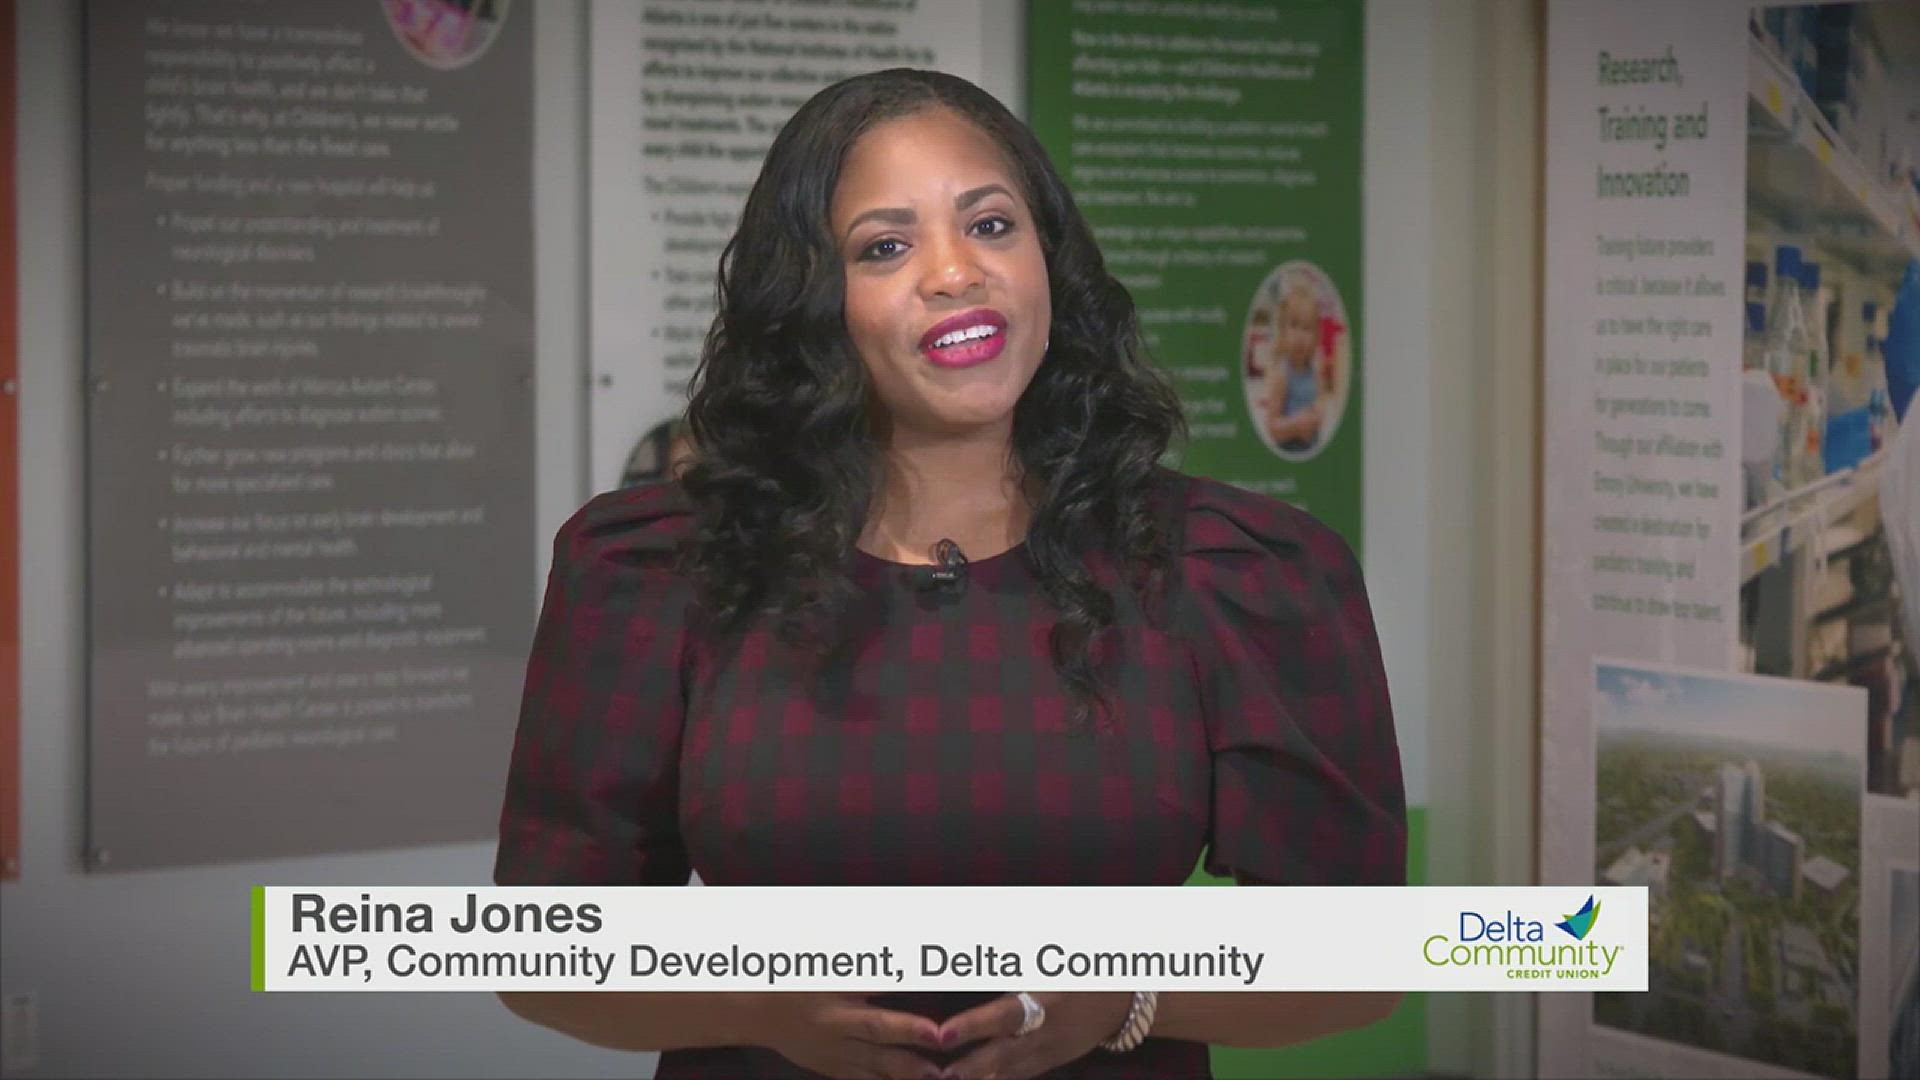 Delta Community Credit Union is an 11Alive Company That Cares